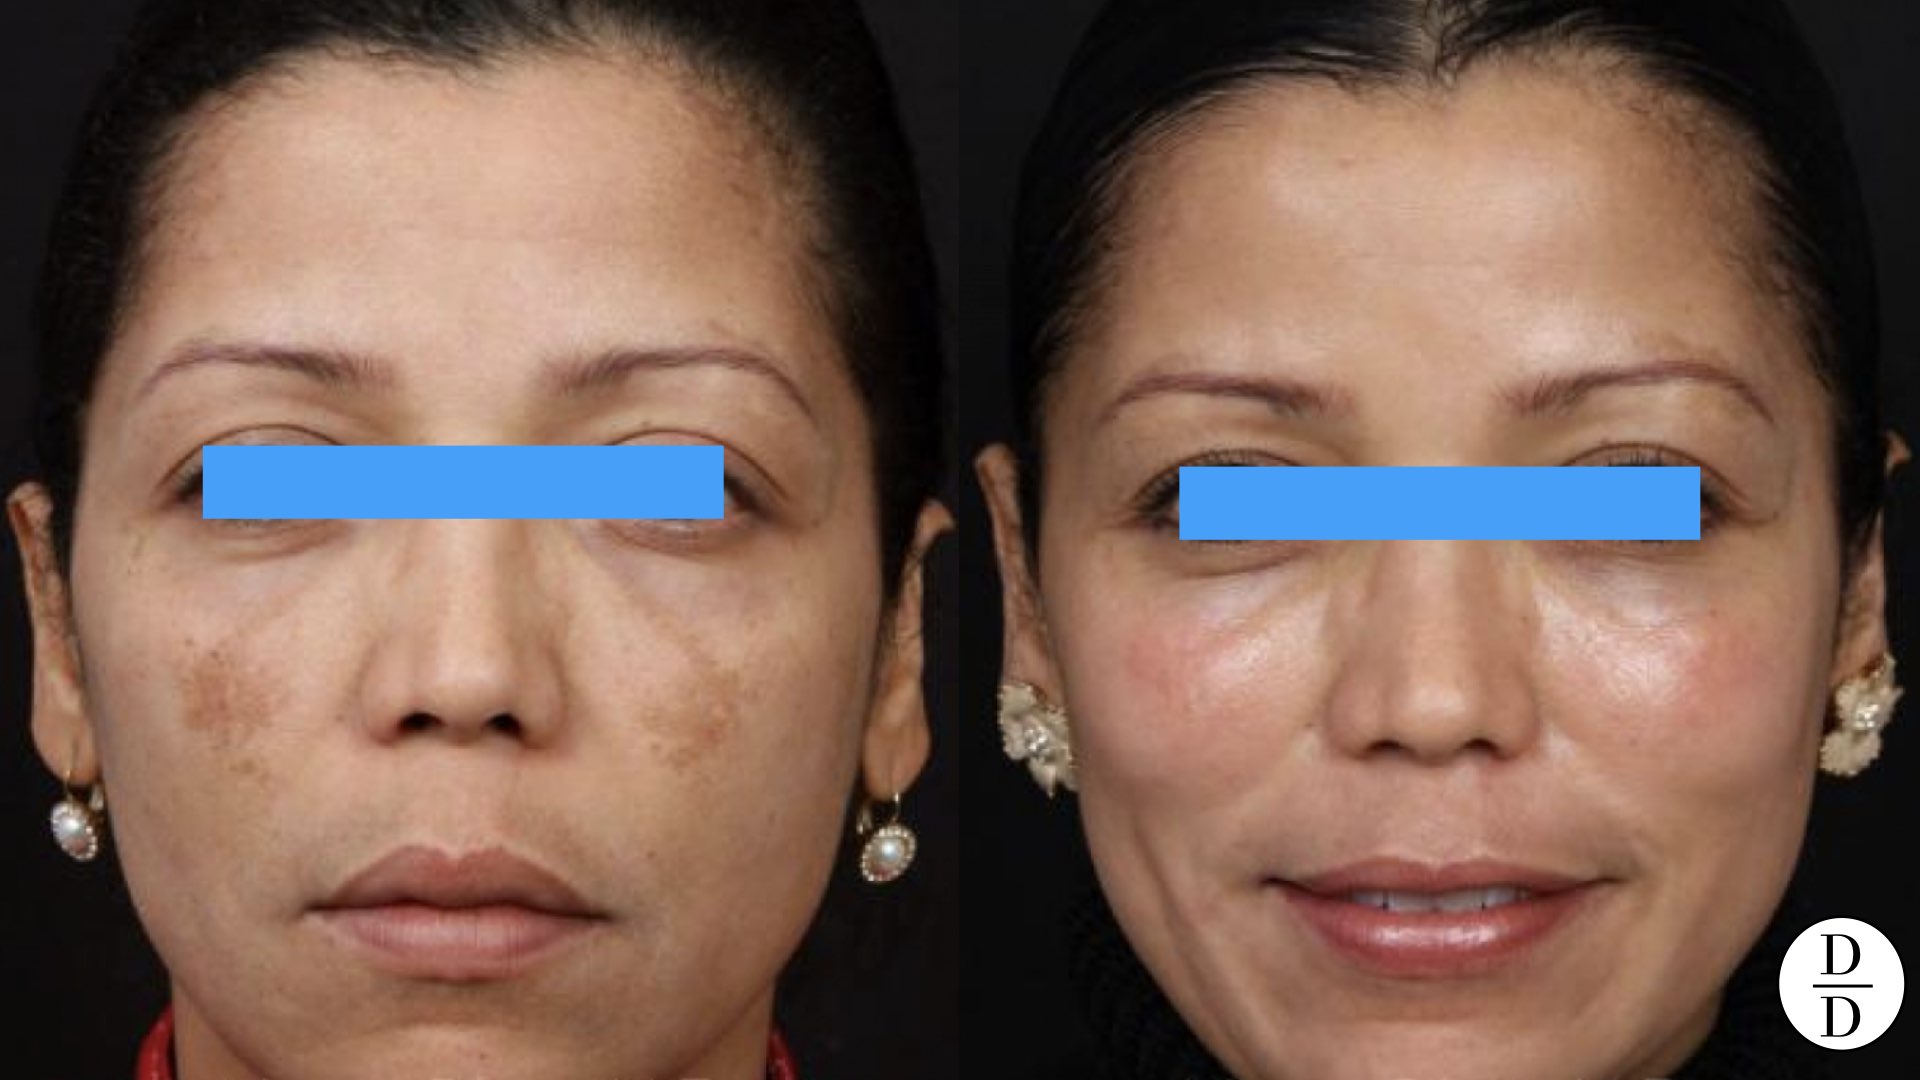 cosmelan results melbourne before and adter